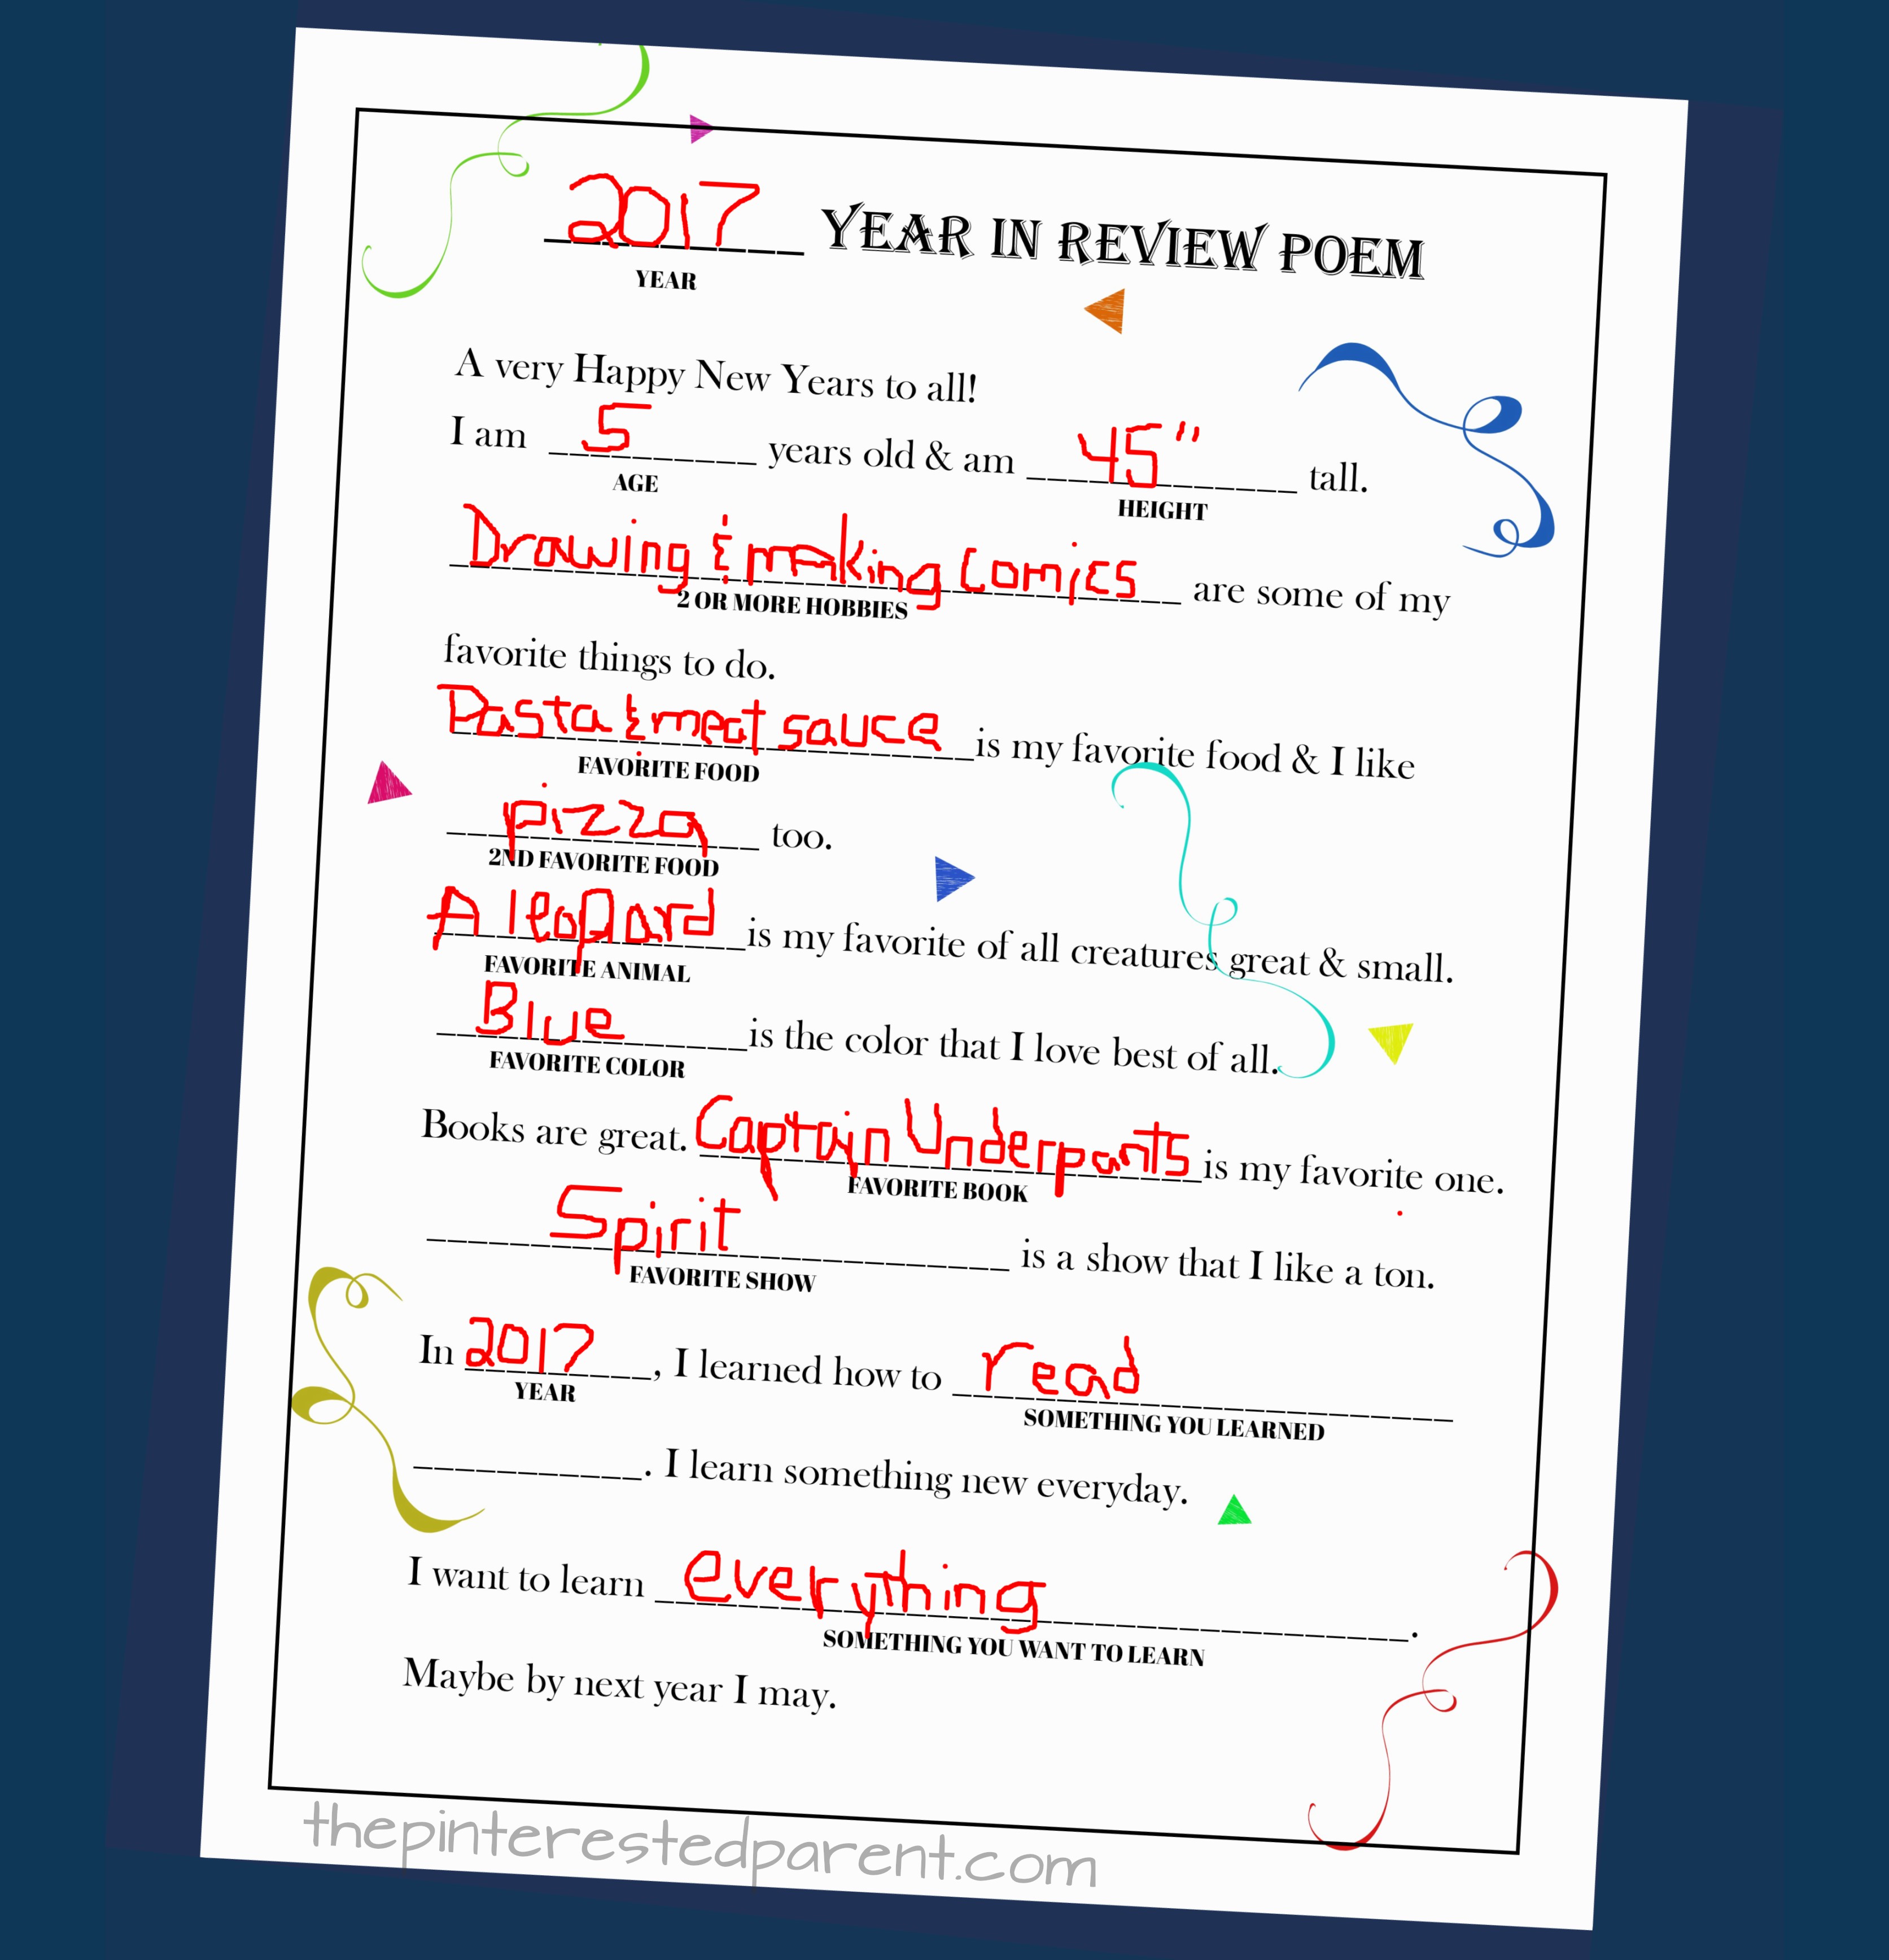 Printable Year In Review Fill-in Poem - fillable questionaire poem for kids for New years